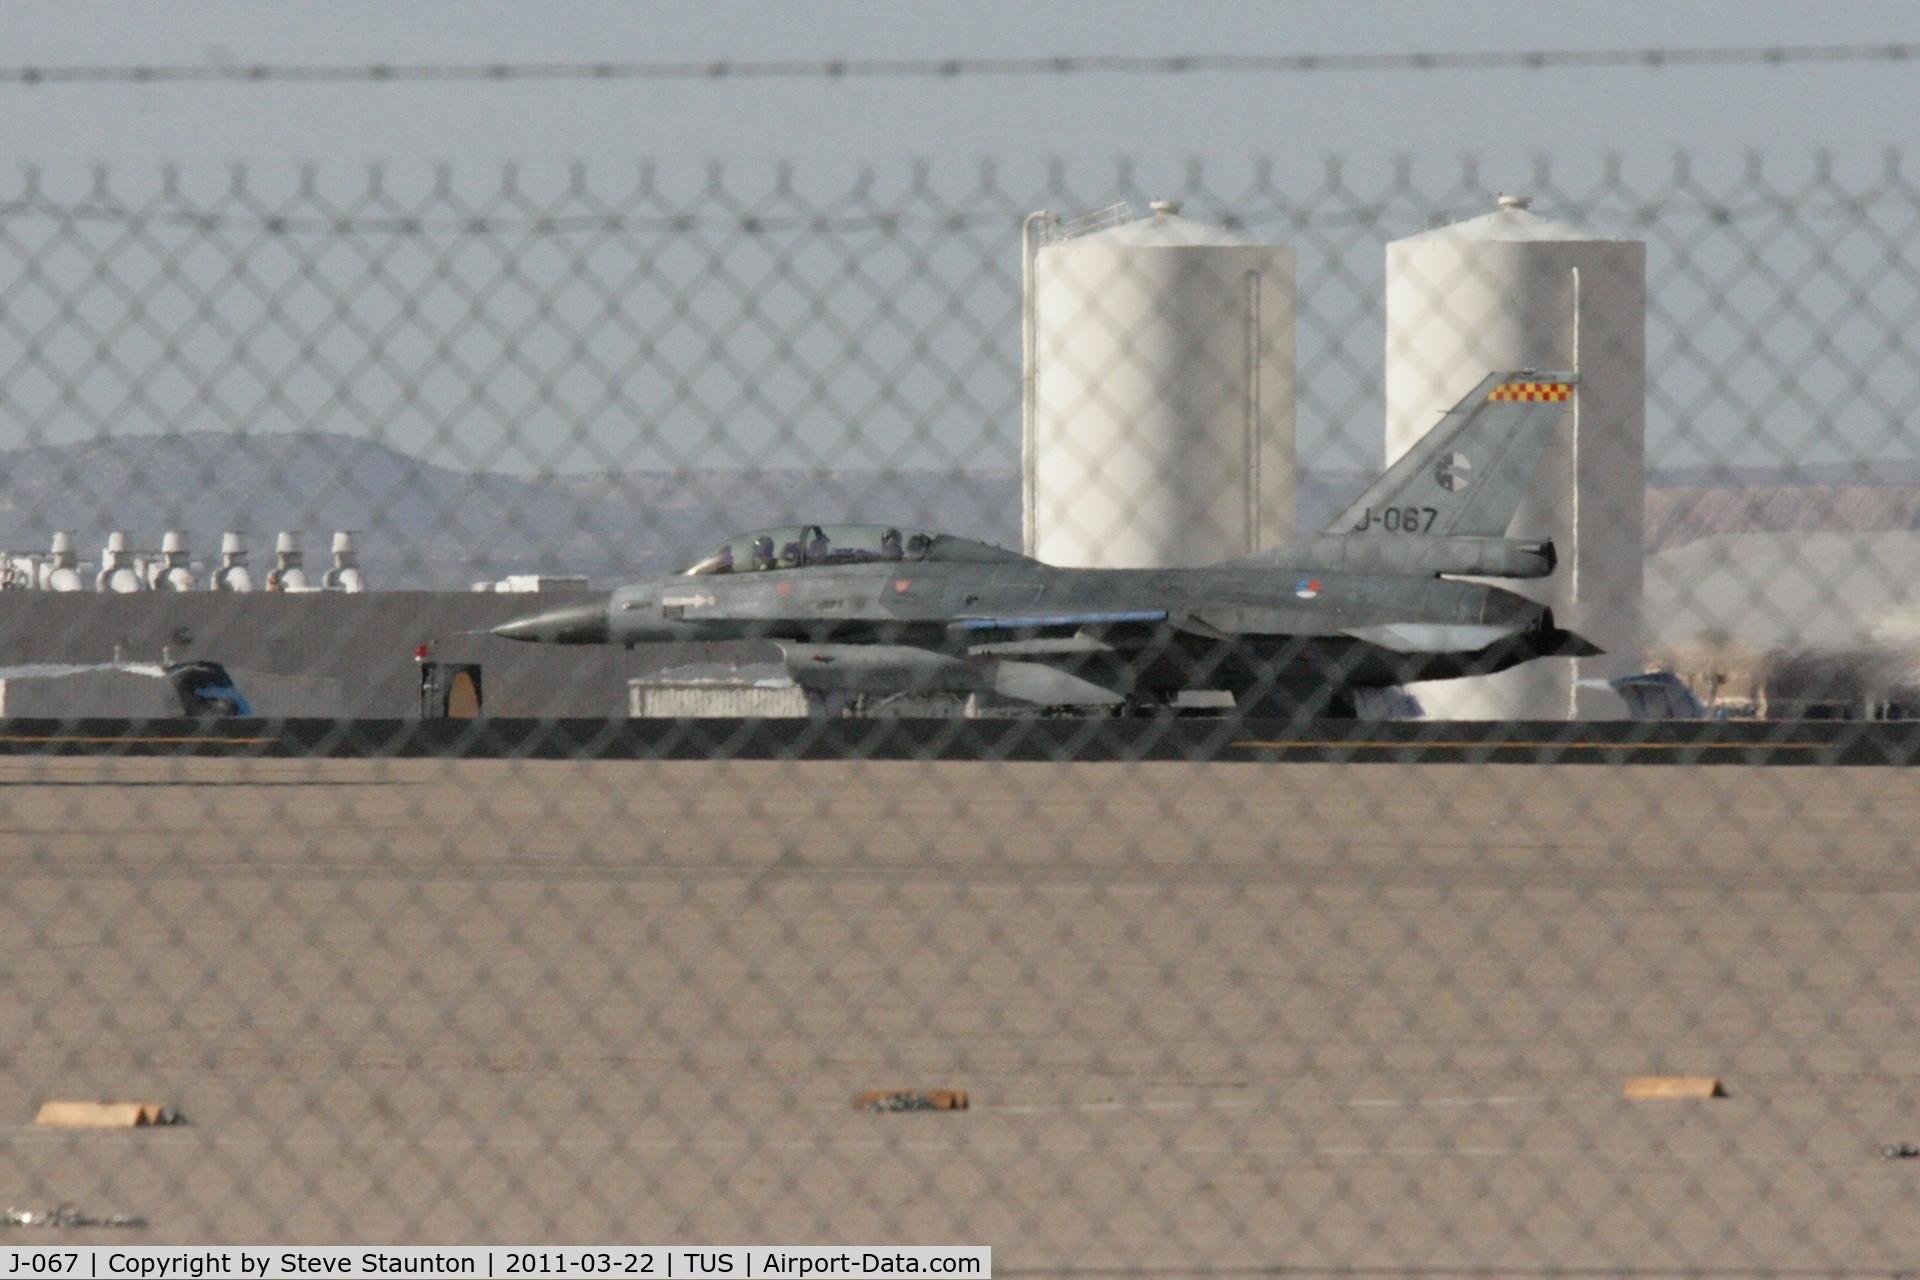 J-067, General Dynamics F-16BM C/N F-16BM Fighting Falcon, Taken at Tucson International Airport, in March 2011 whilst on an Aeroprint Aviation tour